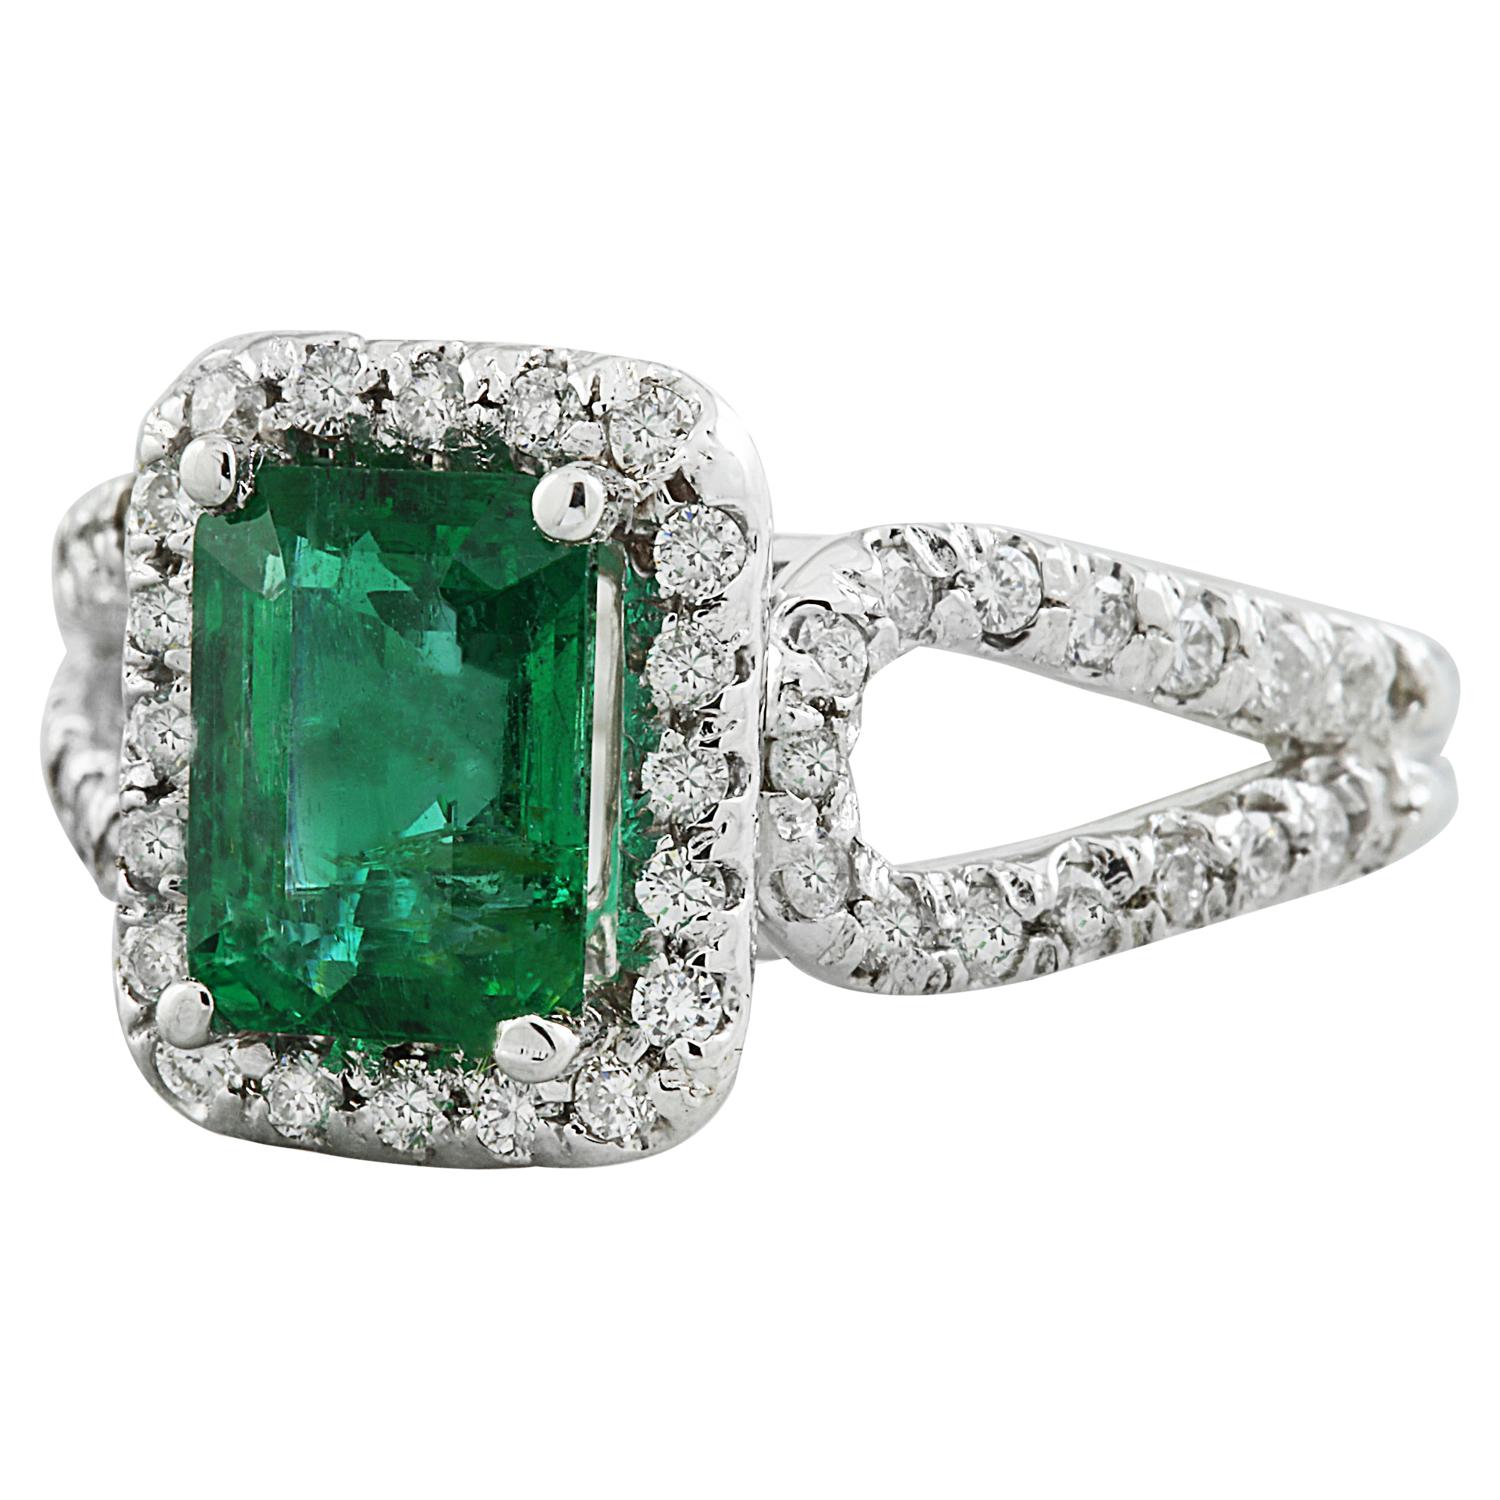 2.10 Carat Natural Emerald 14 Karat Solid White Gold Diamond Ring
Stamped: 14K 
Total Ring Weight: 5.5 Grams 
Emerald Weight 1.60 Carat (8.00x6.00 Millimeters)
Diamond Weight: 0.50 carat (F-G Color, VS2-SI1 Clarity )
Face Measures: 11.65x9.50